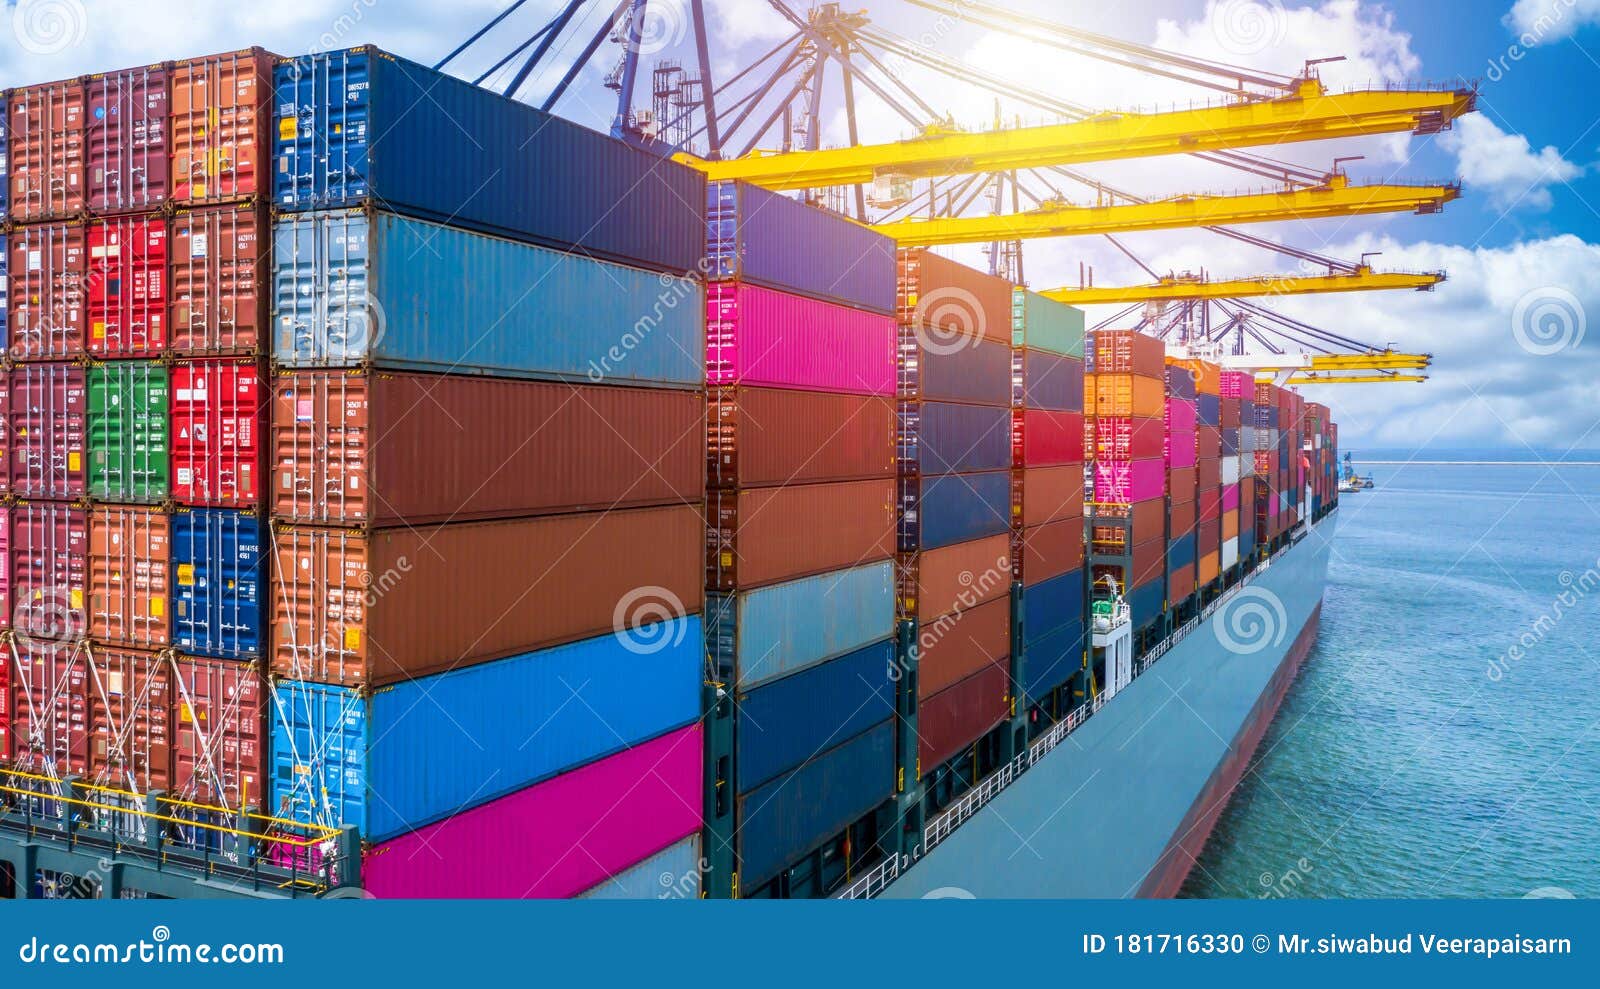 container ship unloading in deep sea port, global business logistic import export freight shipping transportation oversea